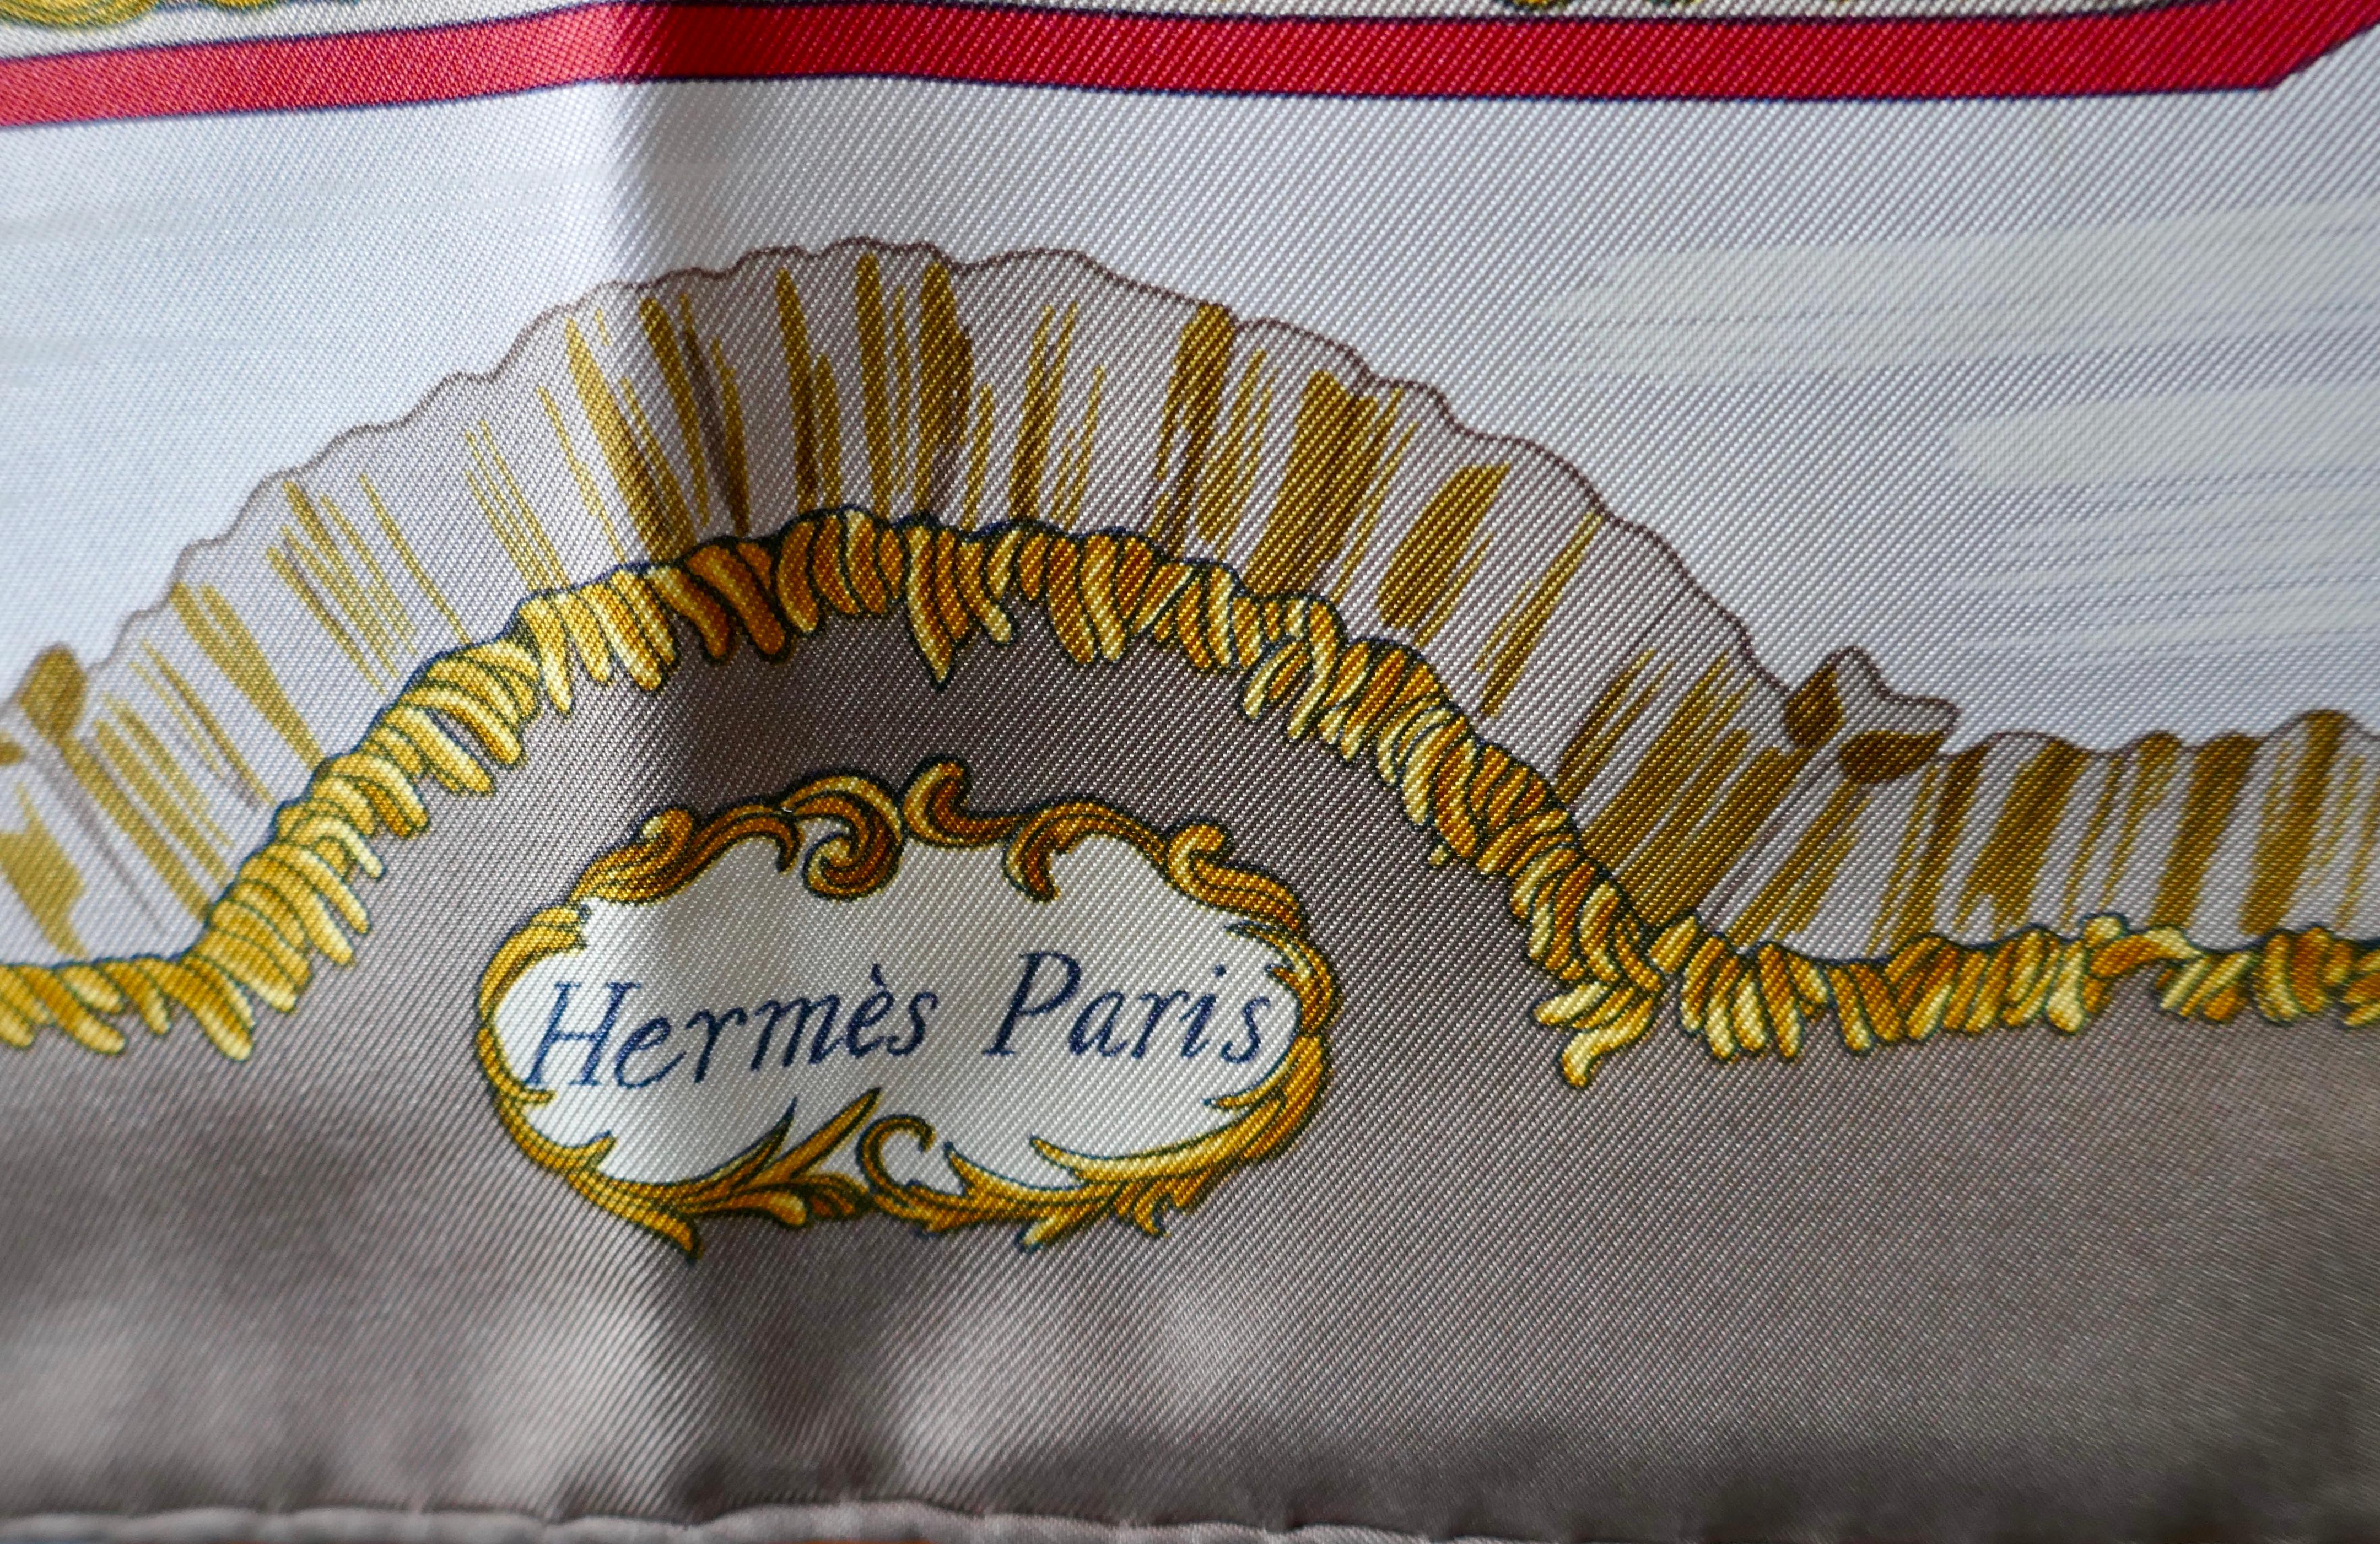 1966 Hermes Silk Scarf “ Traineaux et Glissades” (Sledges) by  Francoise de Perriere

A Stunning, Vintage, Authentic un worn original Hermes Silk Scarf, with an accent towards Christmas and Winter pastimes 
This is an utter delight the artistic